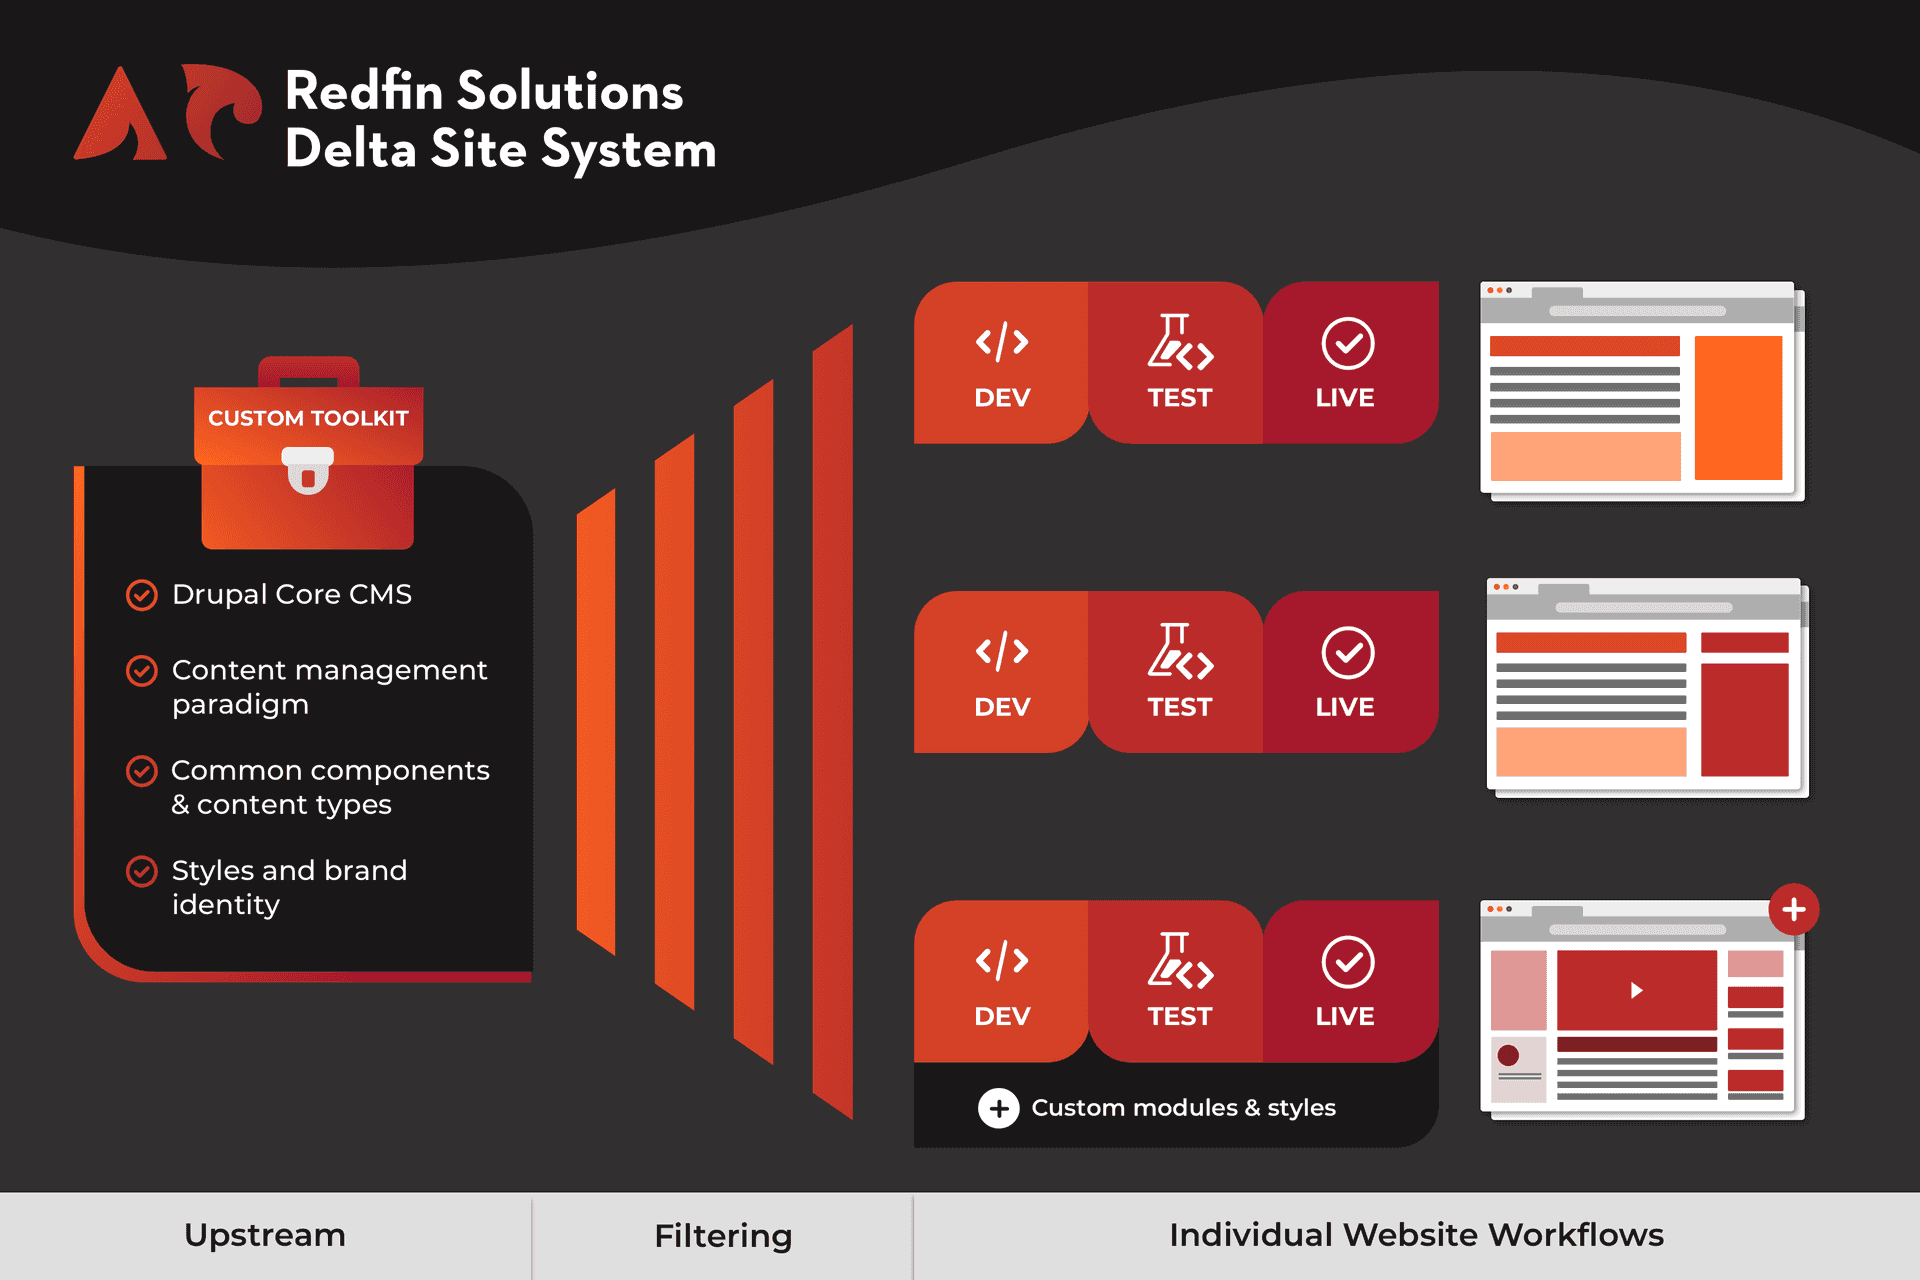 Redfin Solutions Delta Site System custom toolkit: Drupal Core CMS, content management paradigm, common components and content types, and styles and brand identy